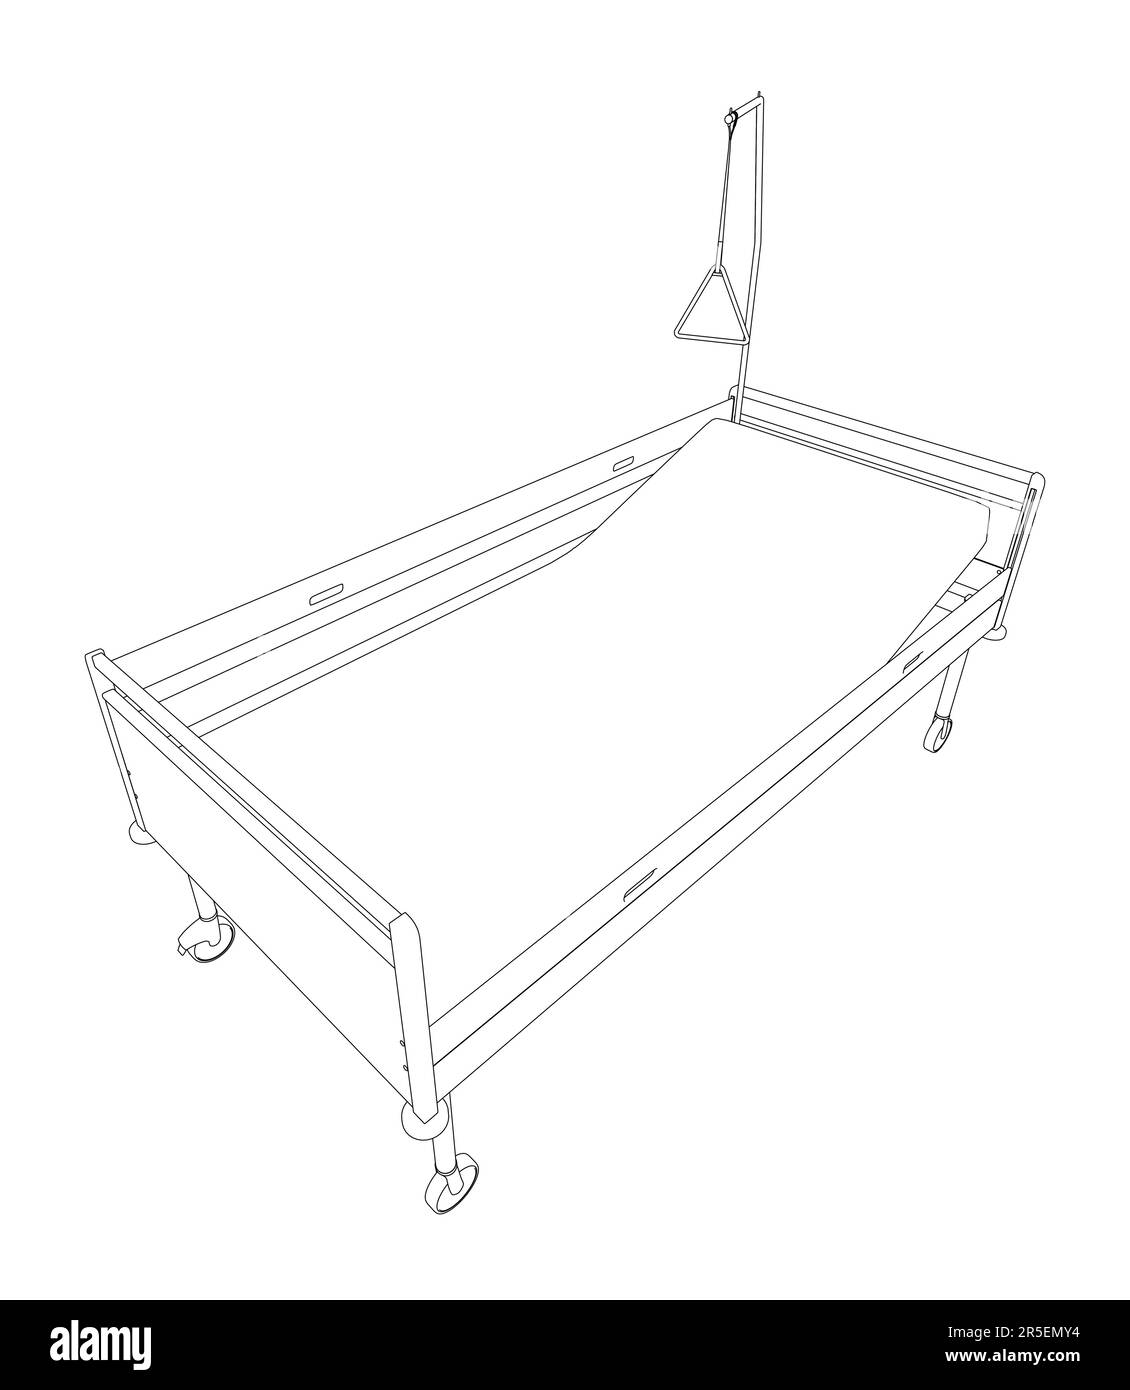 Outline of a hospital bed from black lines isolated on a white ...